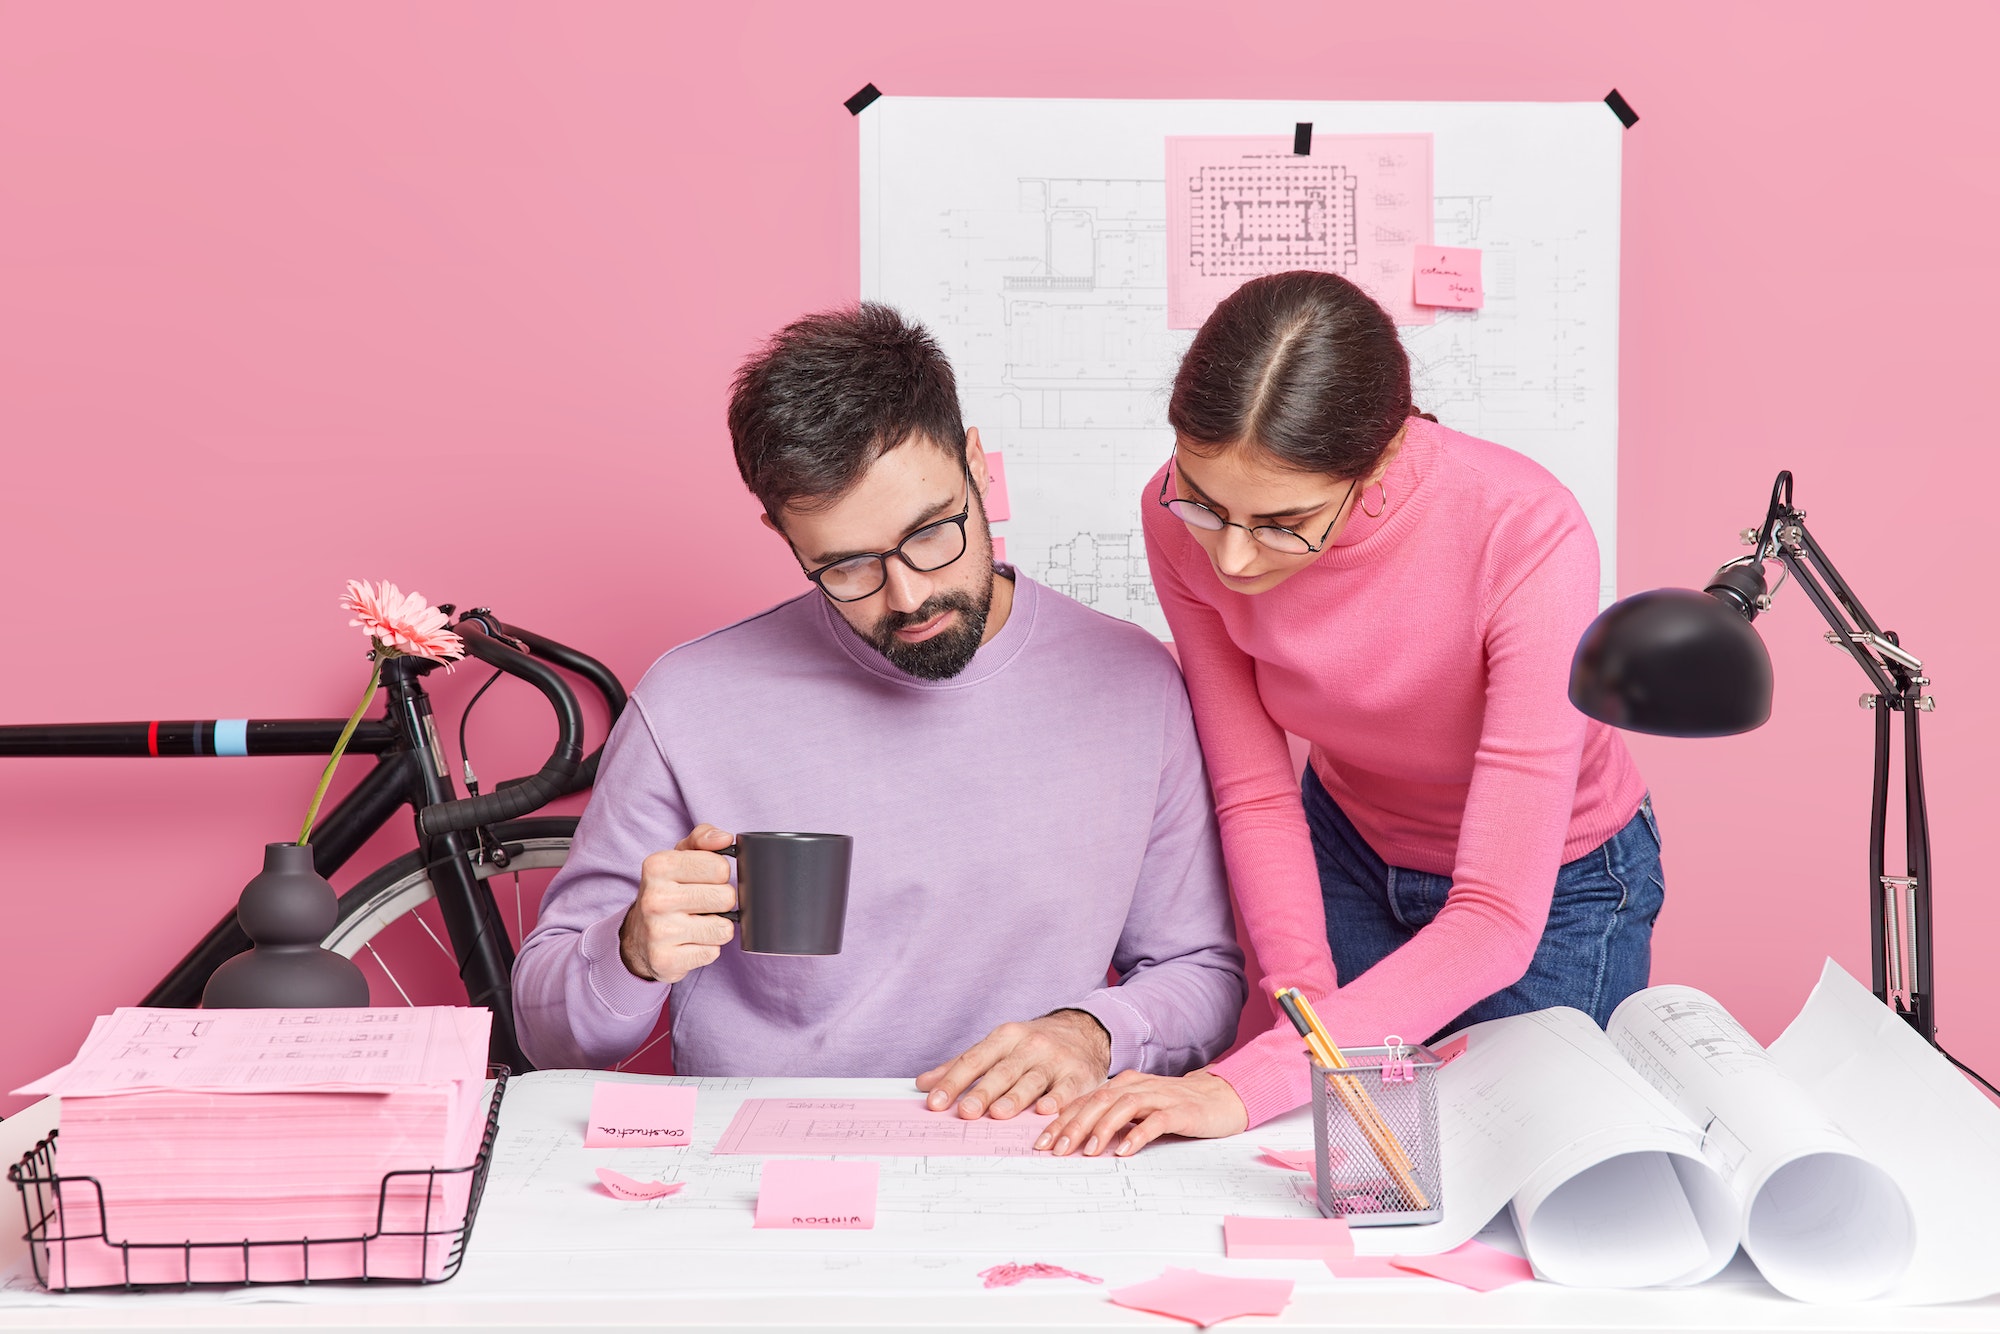 Busy woman and man office workers have brainstorming session share ideas for homework project pose i